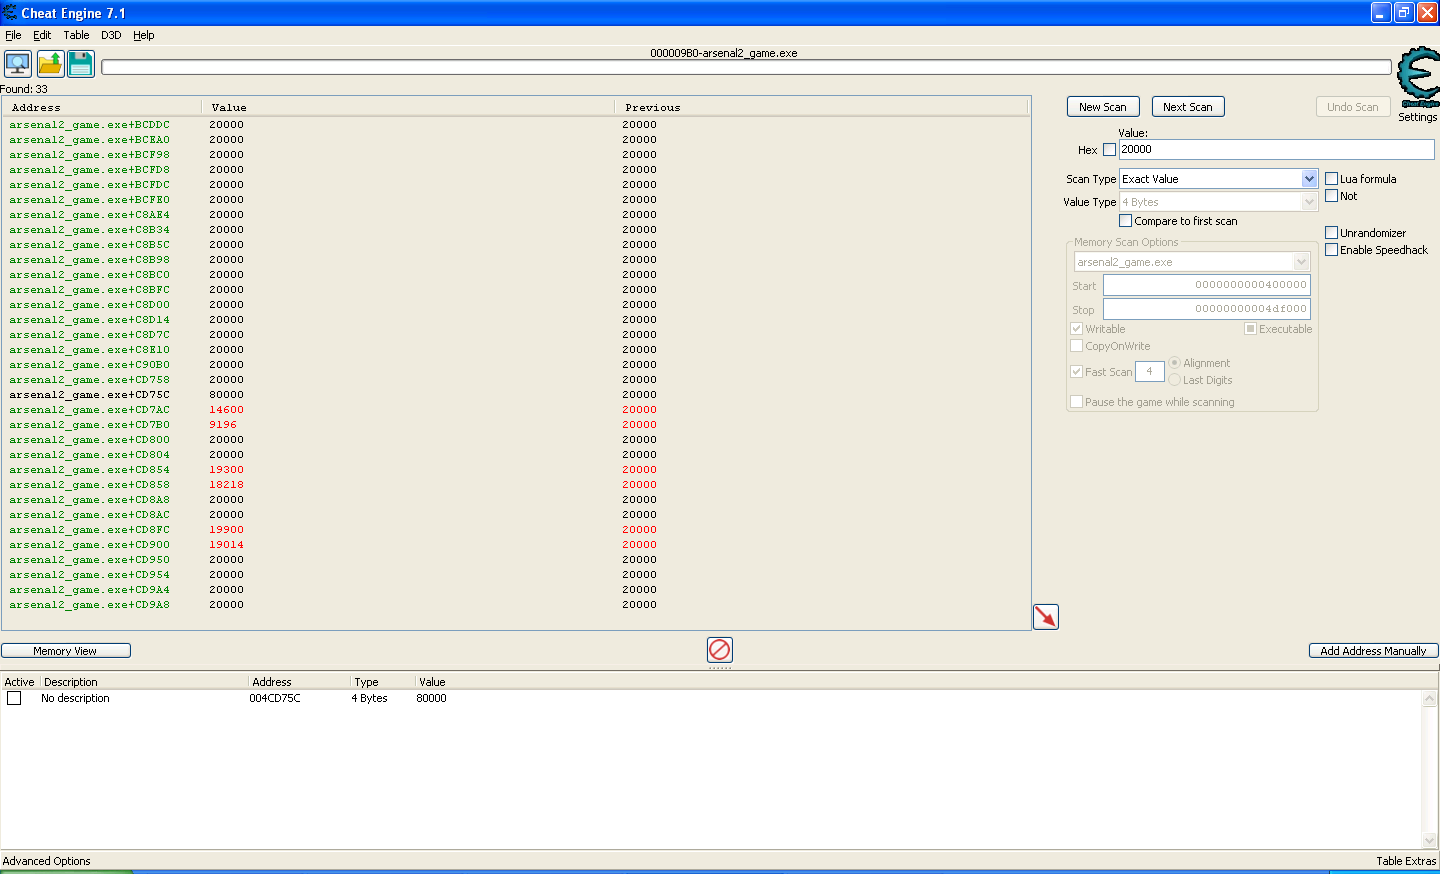 Cheat Engine view, where the value of the memory address was changed to 80000